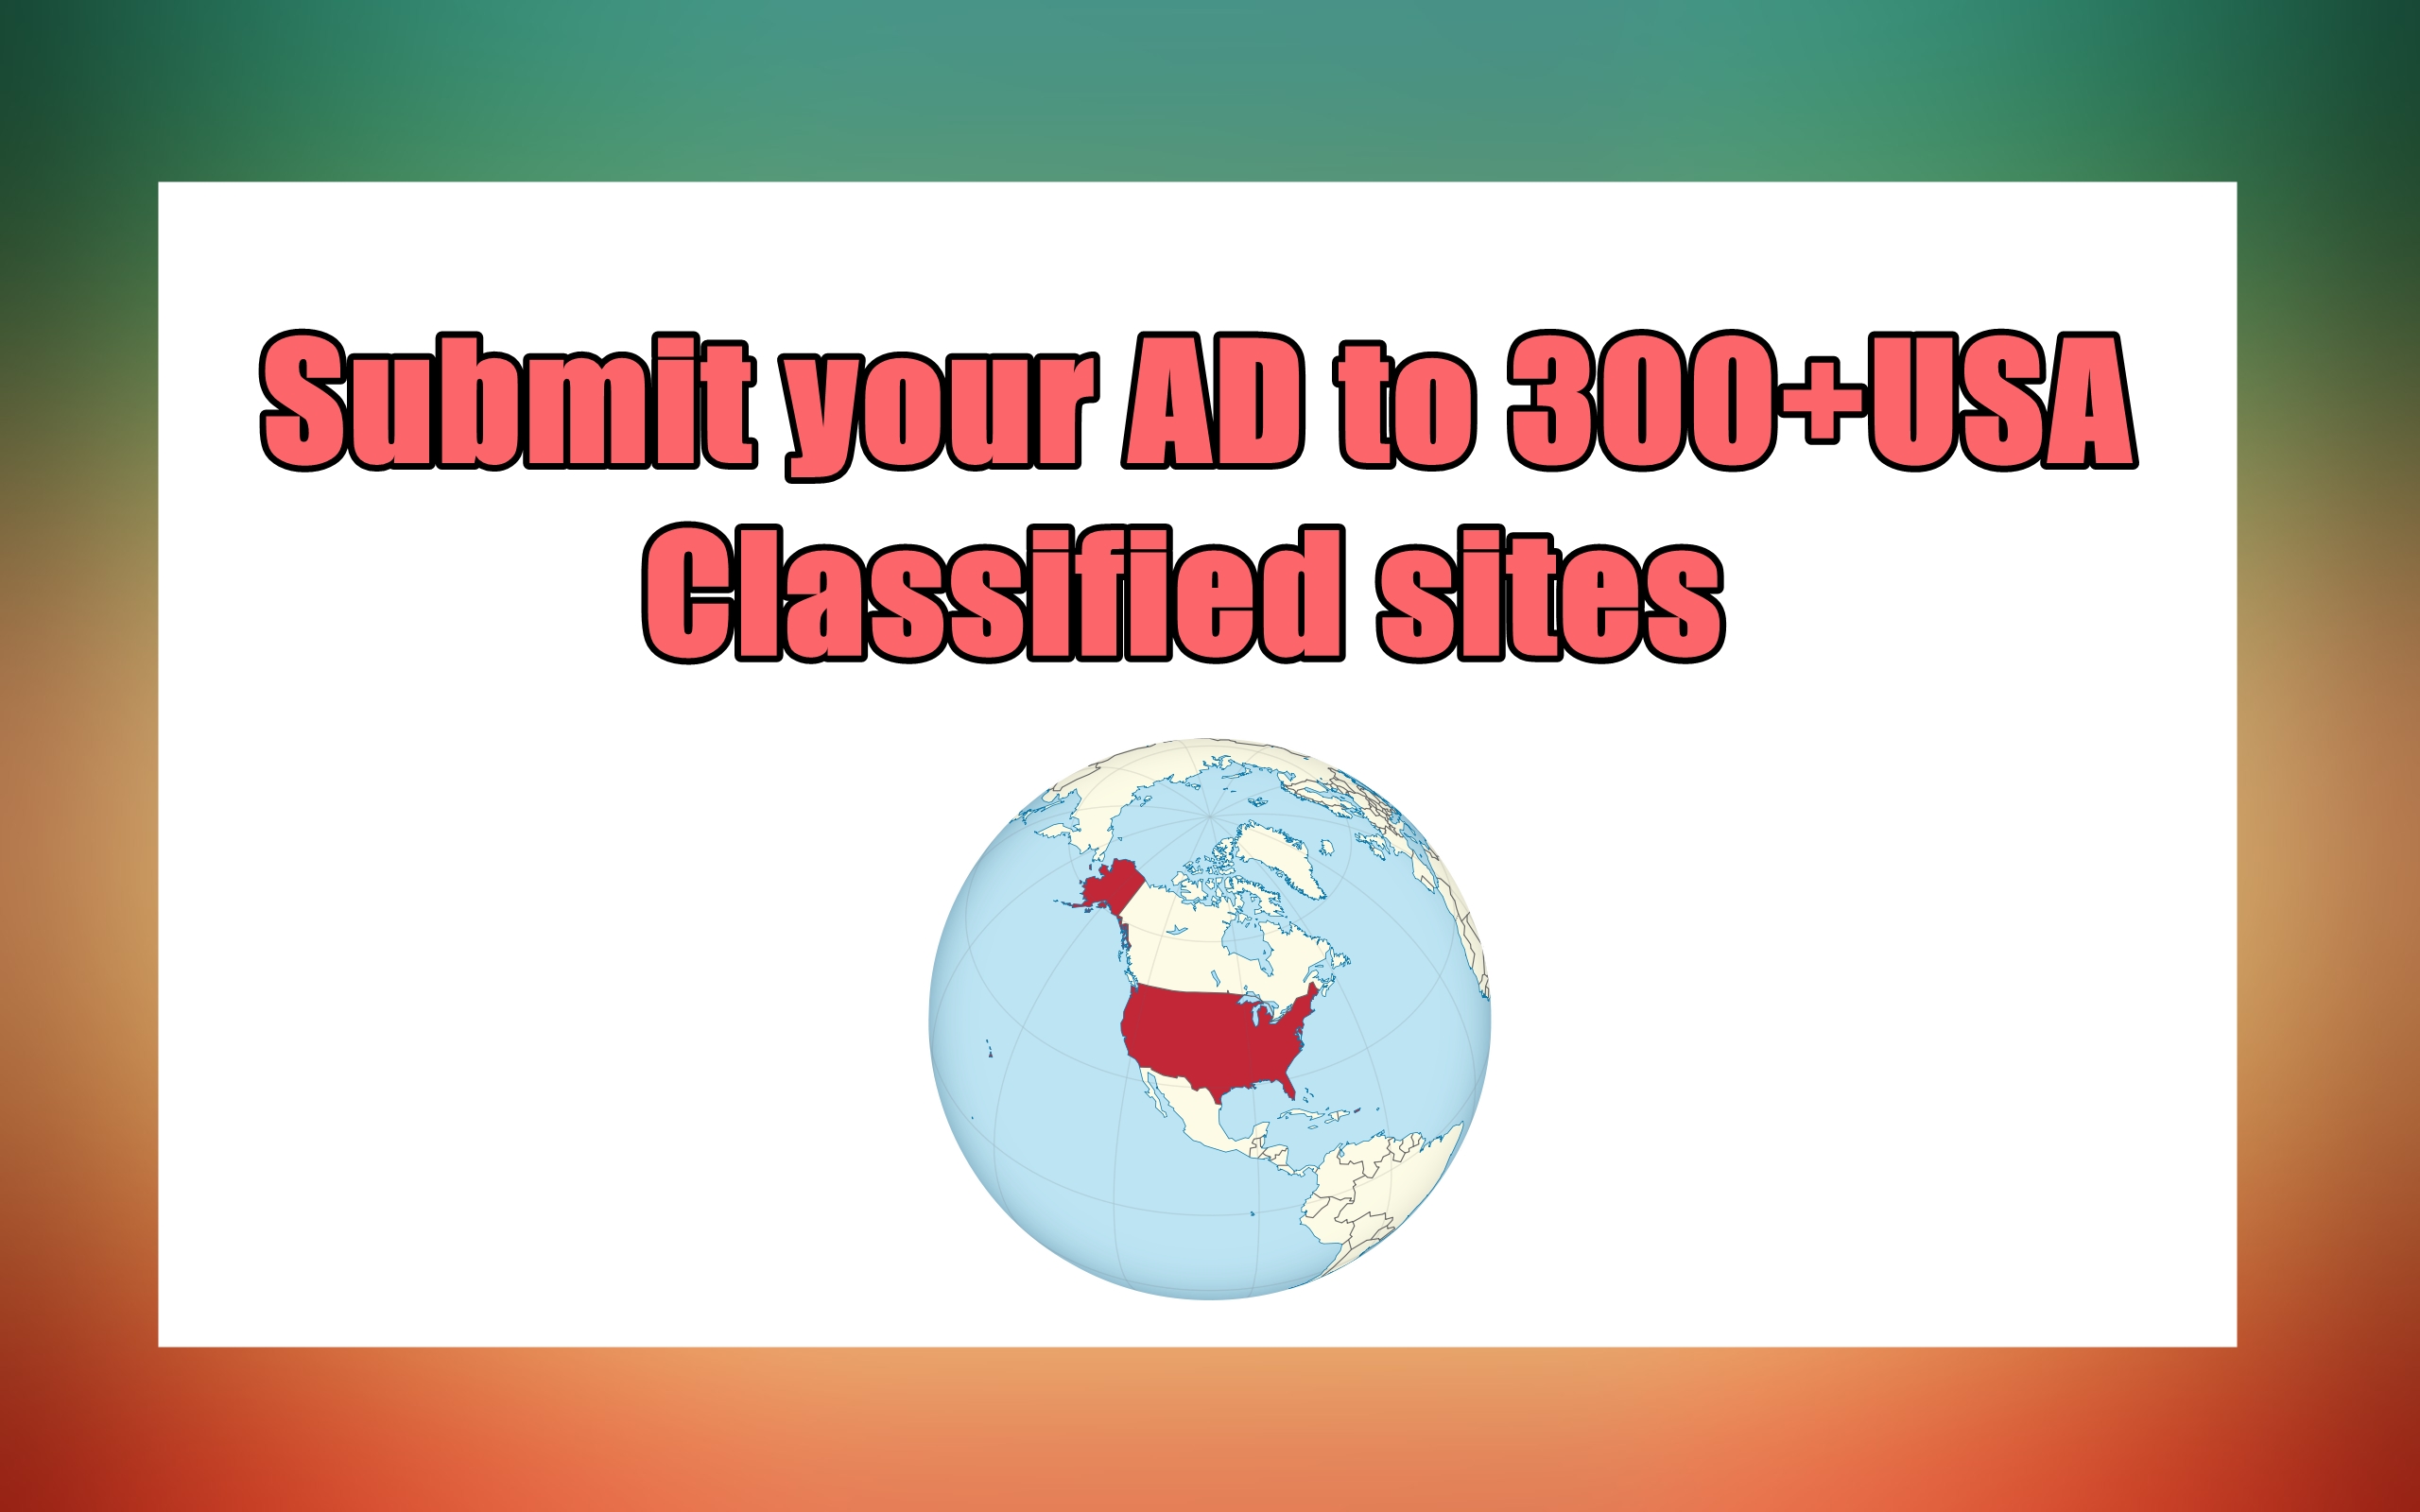 classified site in usa